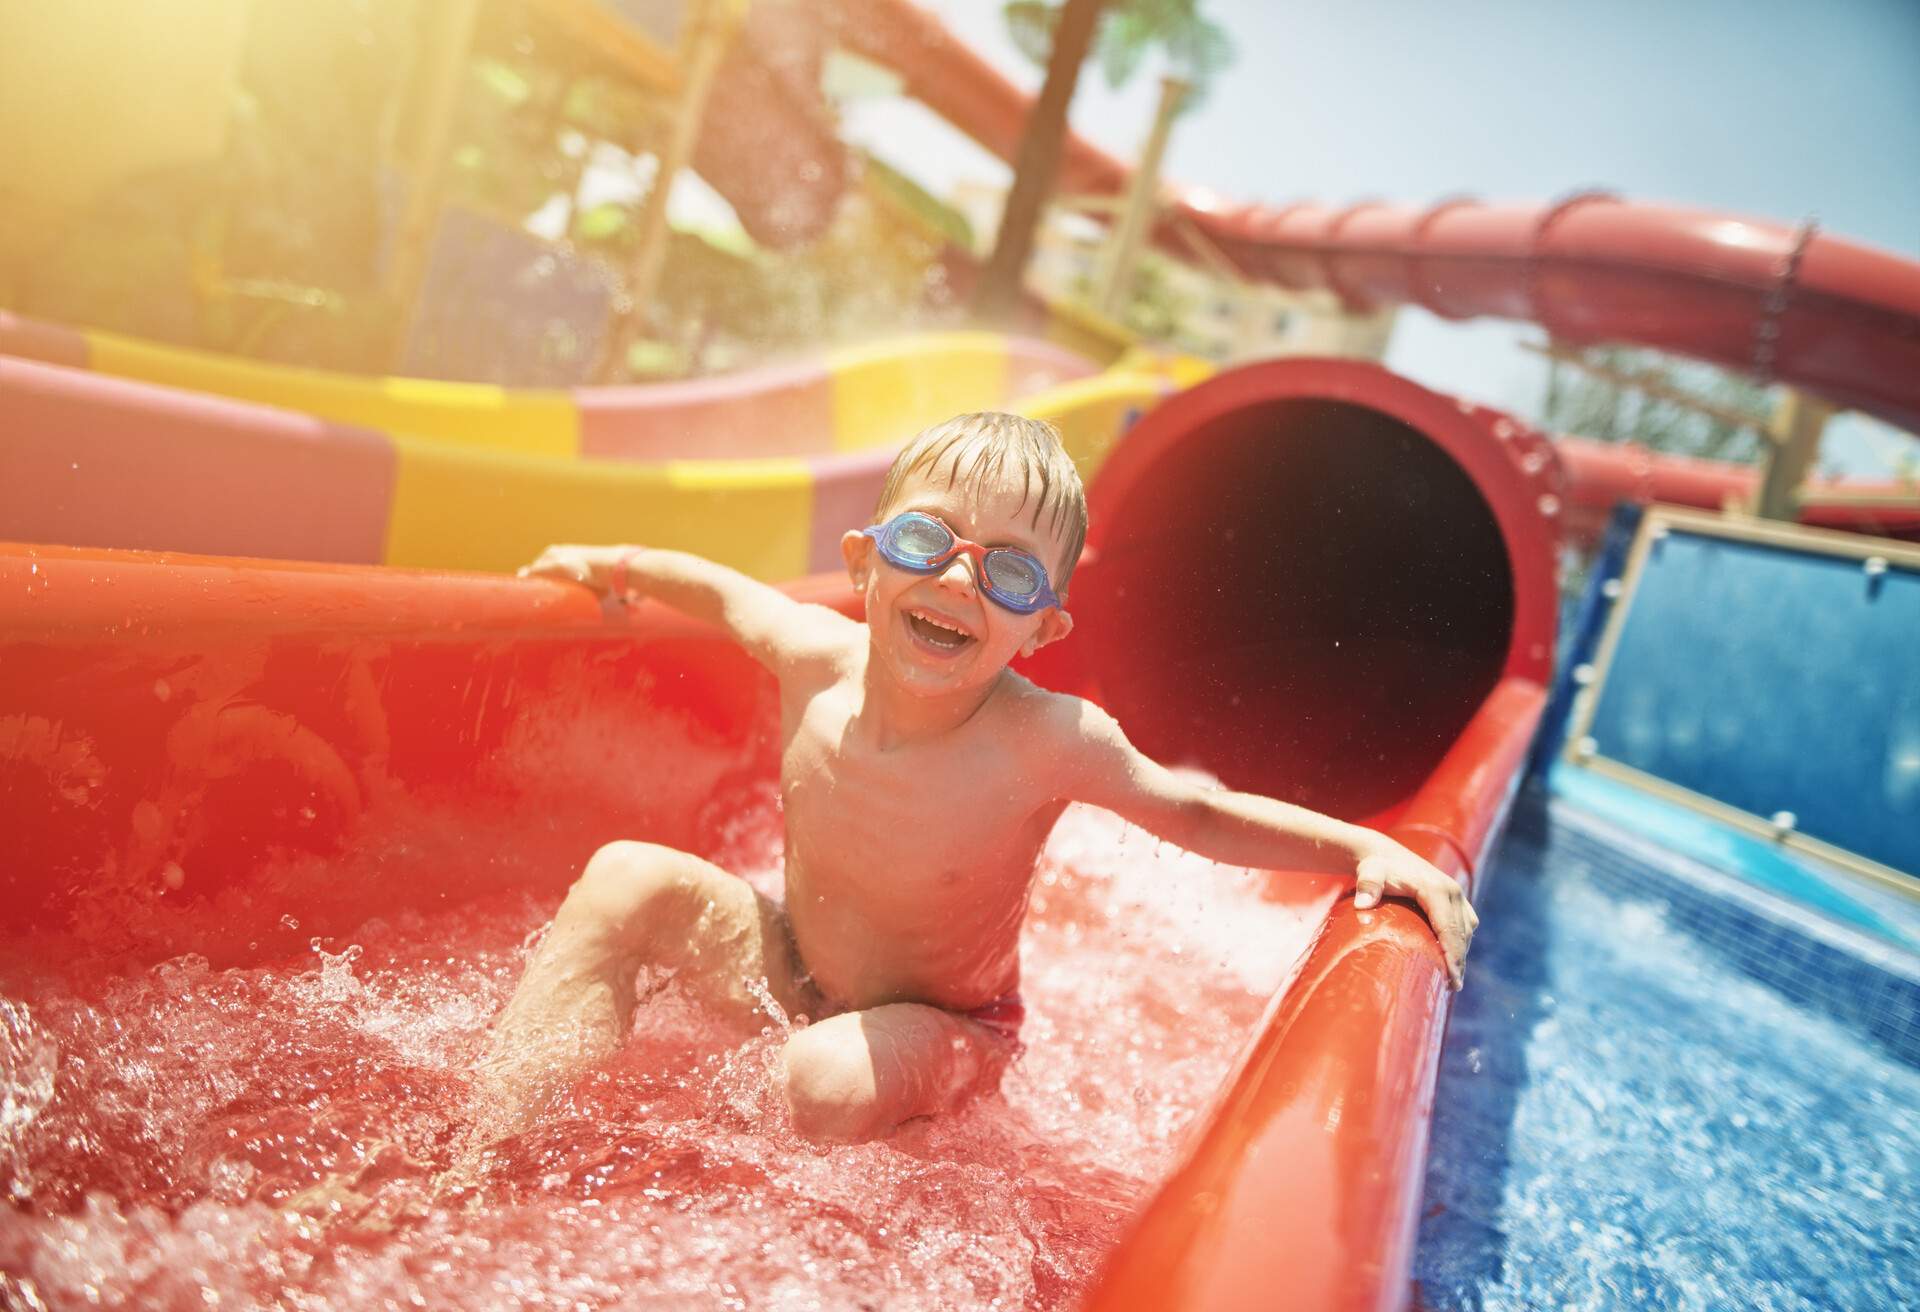 theme_people_children_waterpark_waterslide-gettyimages-481717188_universal_within-usage-period_83345.jpg